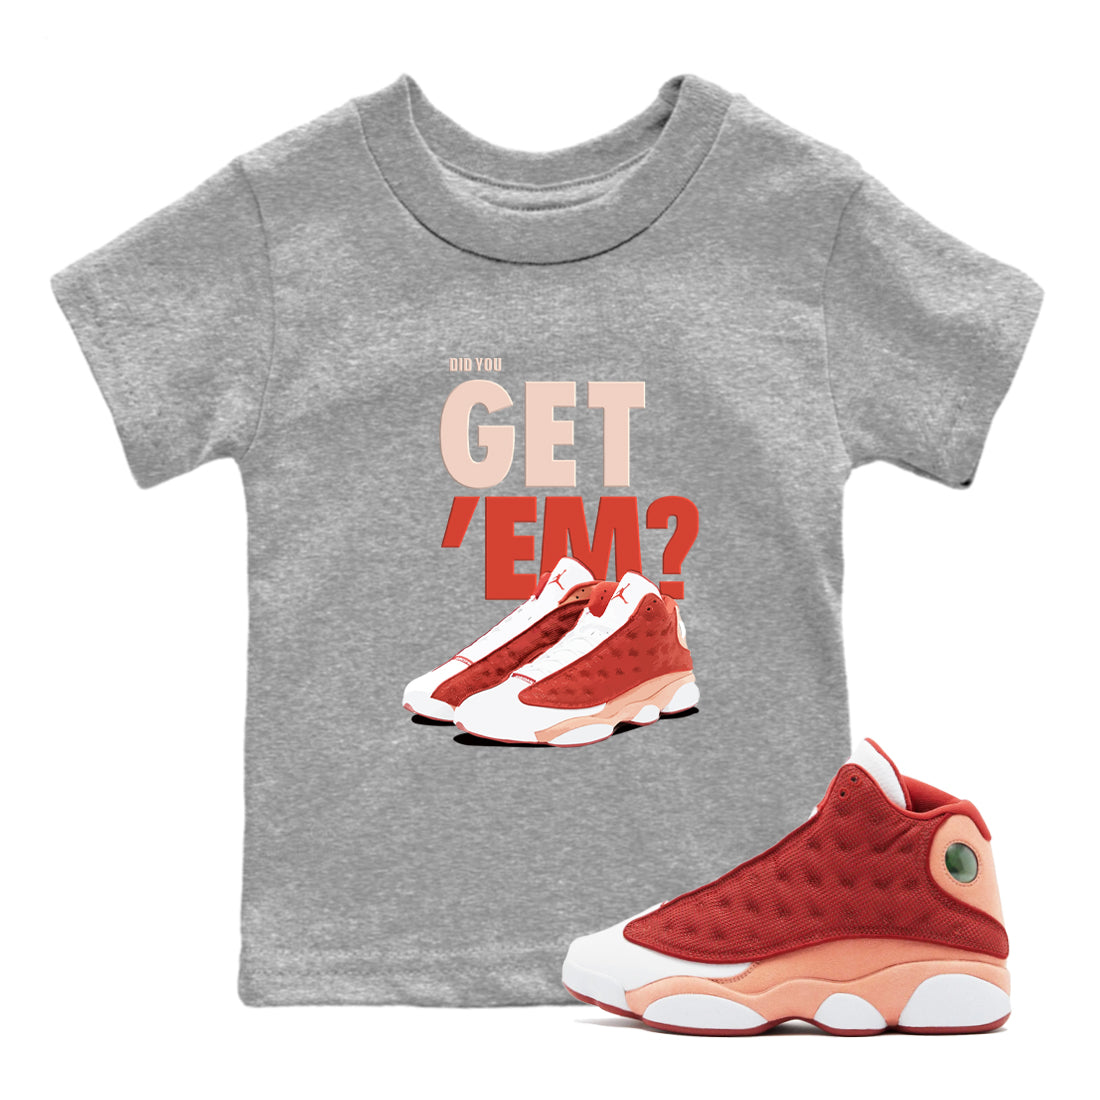 13s Dune Red shirts to match jordans Did You Get 'Em sneaker match tees Air Jordan 13 Dune Red SNRT Sneaker Tees streetwear brand Baby and Youth Heather Grey 1 cotton tee